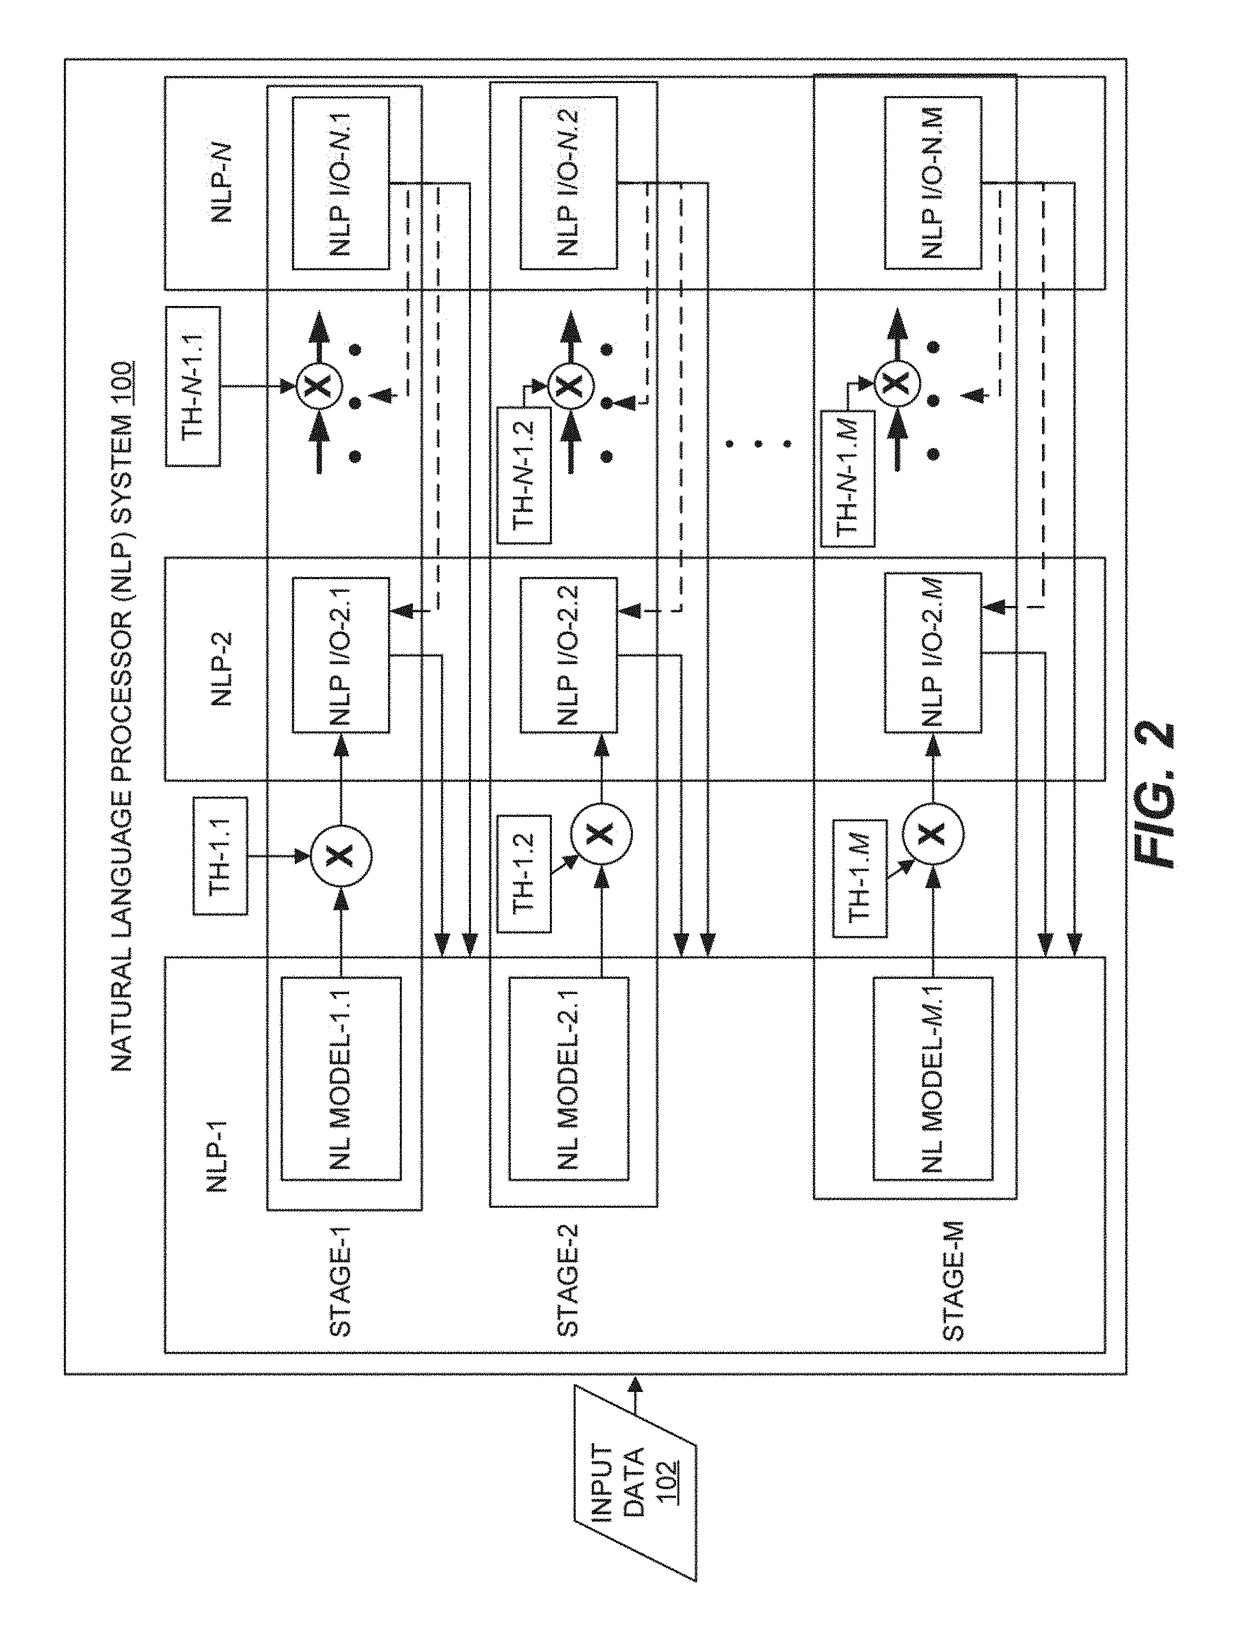 Cooperatively operating a network of supervised learning processors to concurrently distribute supervised learning processor training and provide predictive responses to input data